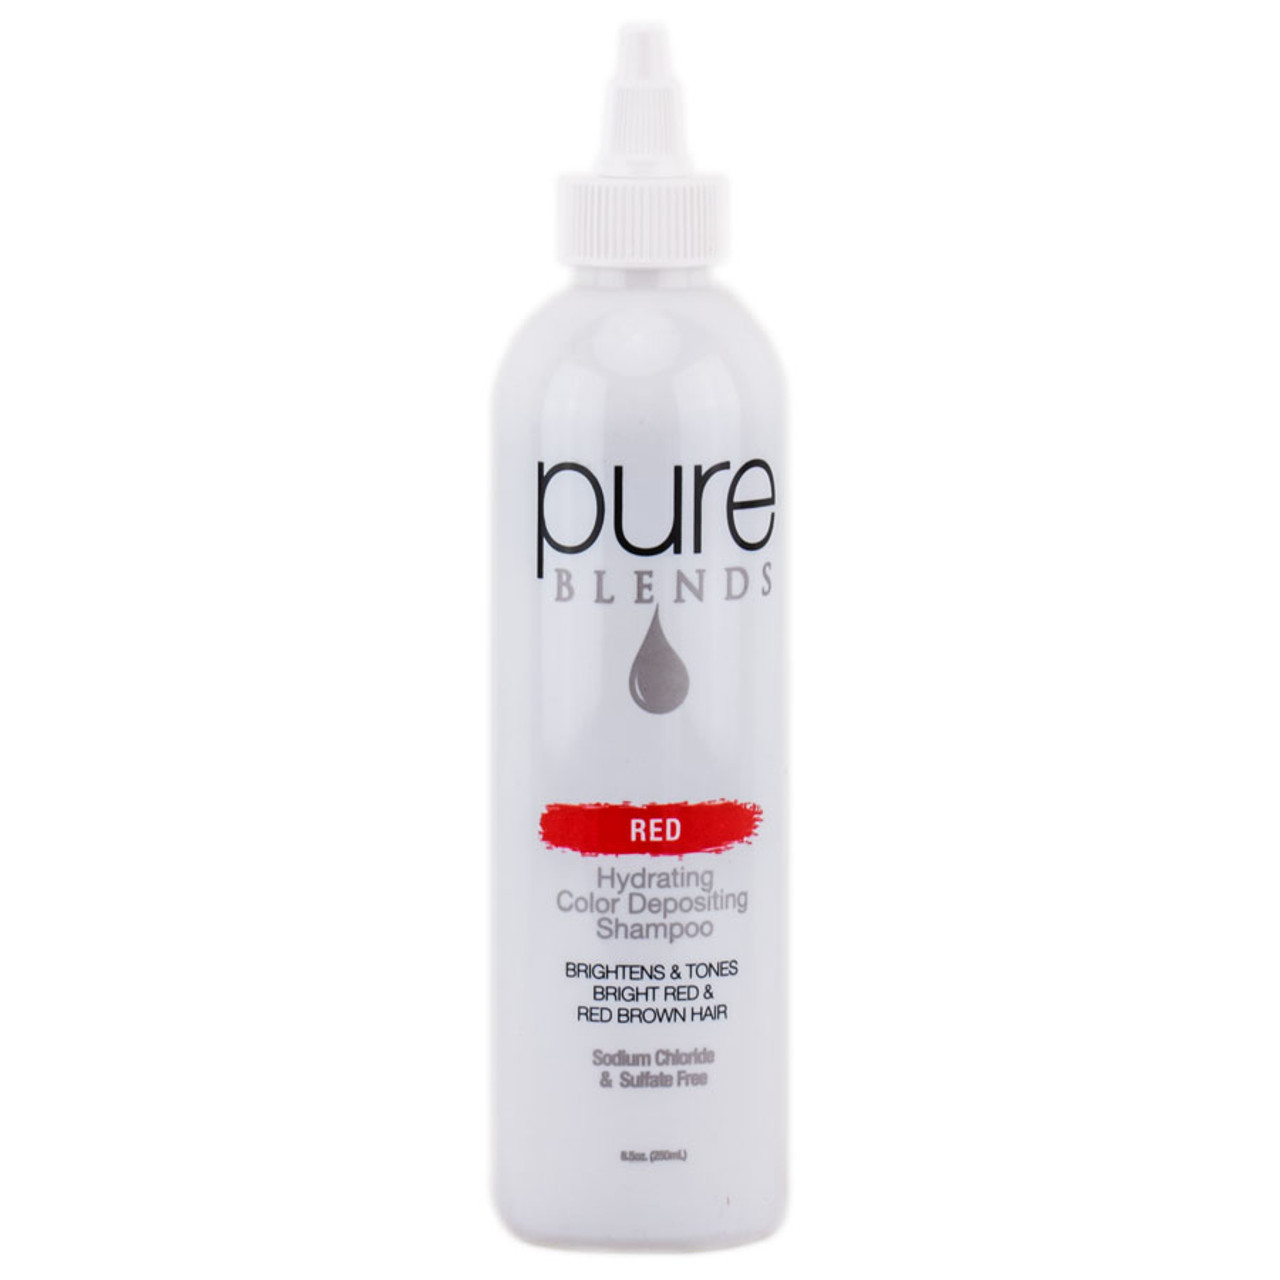 Pure Blends Hydrating Color Depositing Shampoo Red